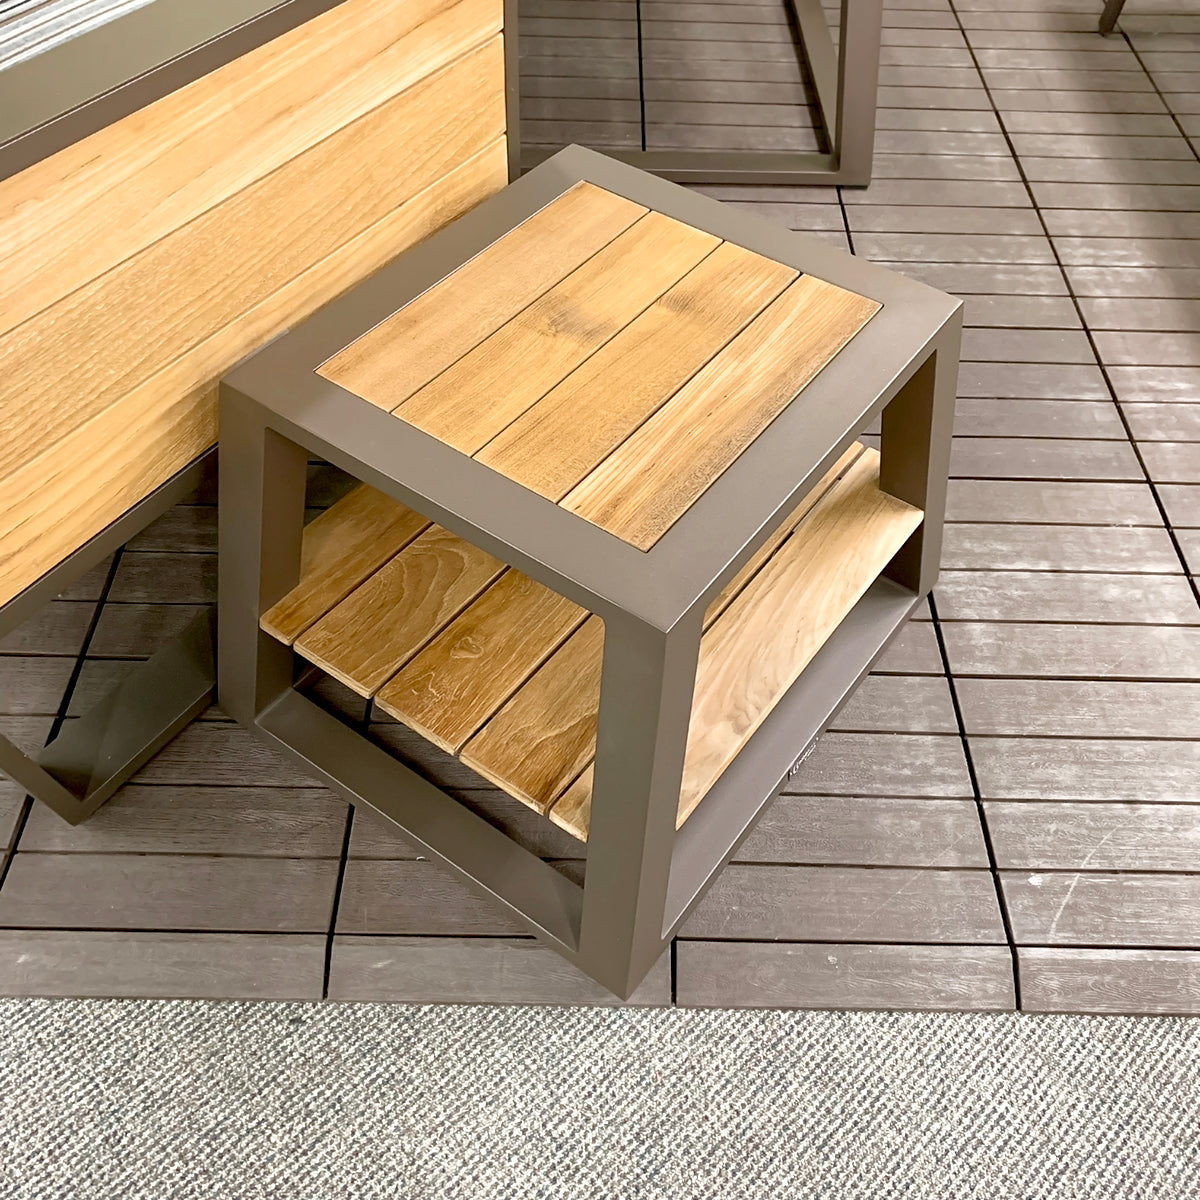 IndoSoul St. Lucia Outdoor End Table in our Jacobs Custom Living Spokane Valley showroom.